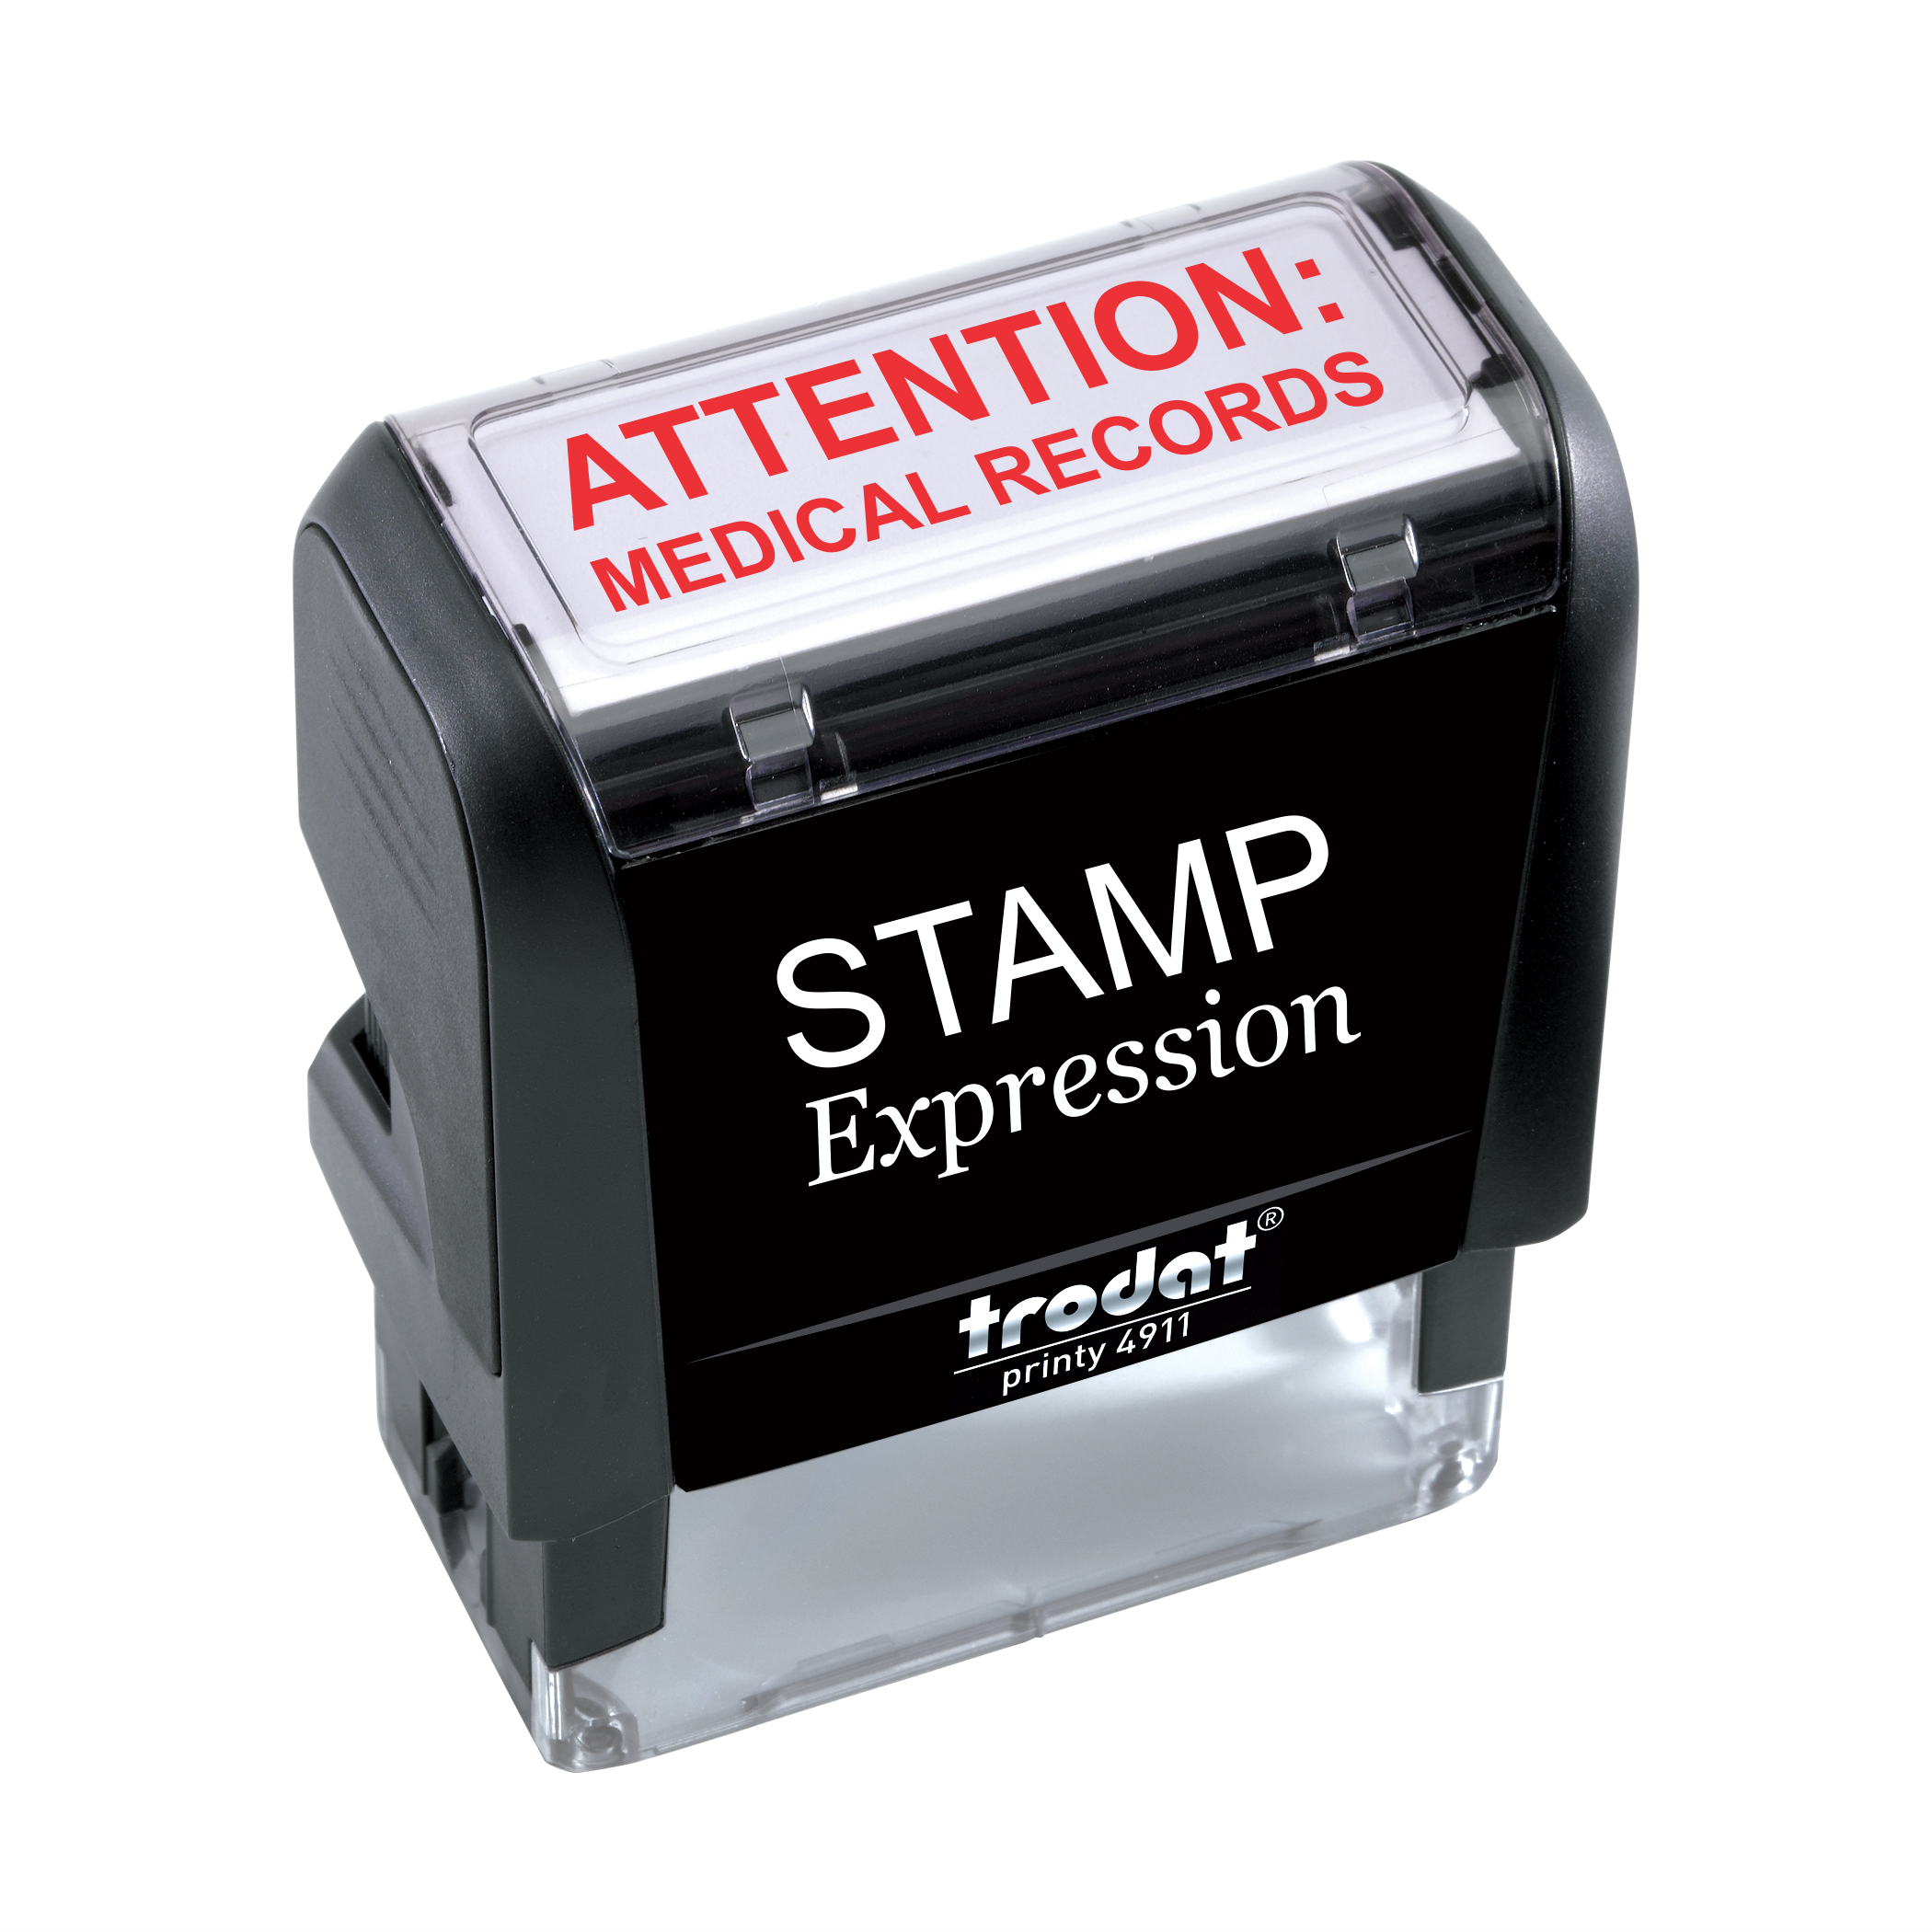 Attention Medical Records Self Inking Rubber Stamp